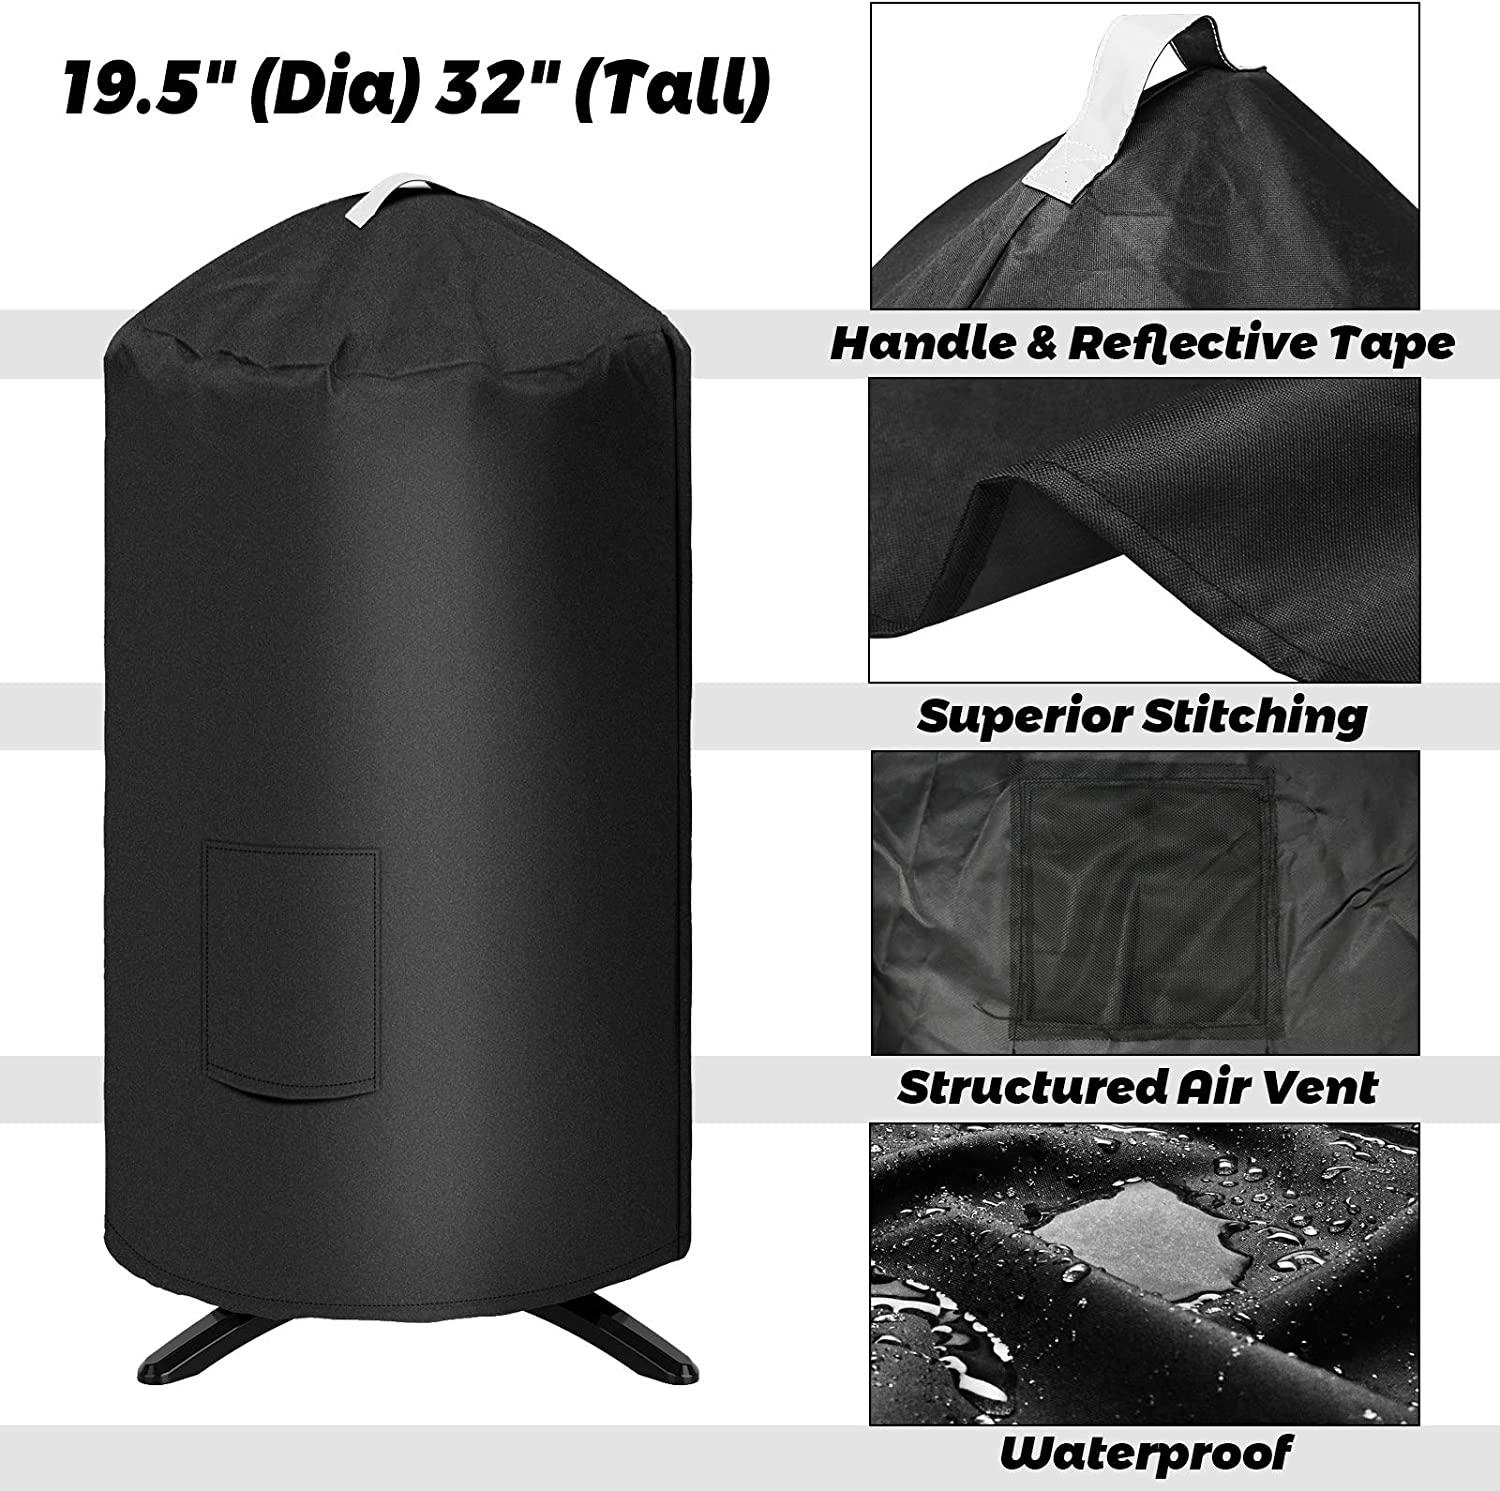 Utheer Round Grill Cover 19.5'' Dia for George Foreman GGR50B GFO3320 GFO240, Indoor Outdoor BBQ Electric Grills, Heavy Duty Waterproof BBQ Grill Cover - image 2 of 7